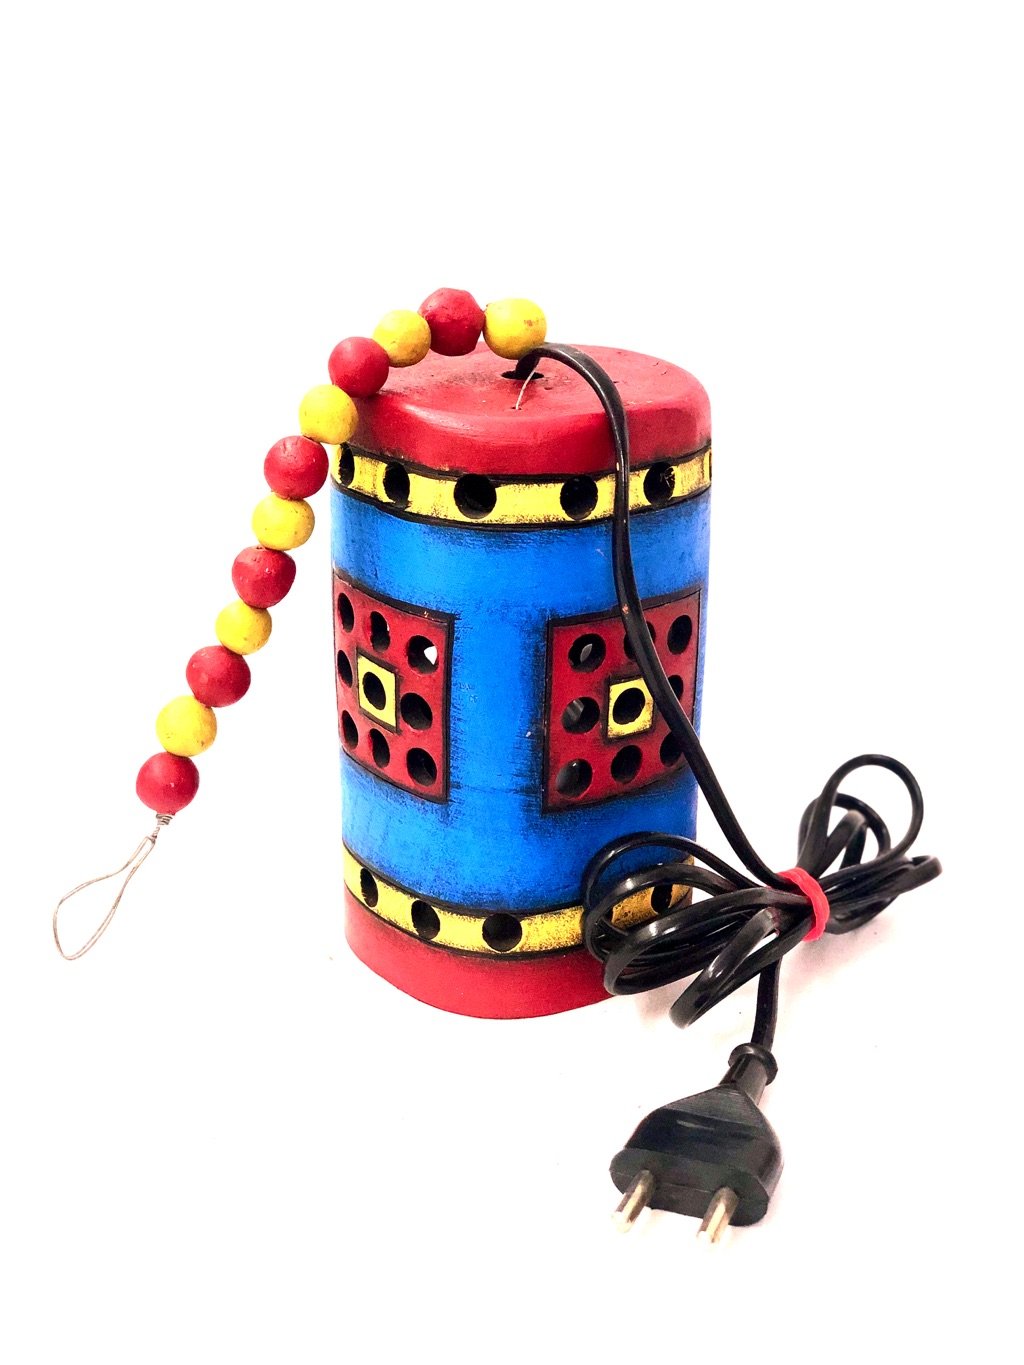 Excellent Craftsmanship Terracotta Lamps With Beads Hanging Tamrapatra